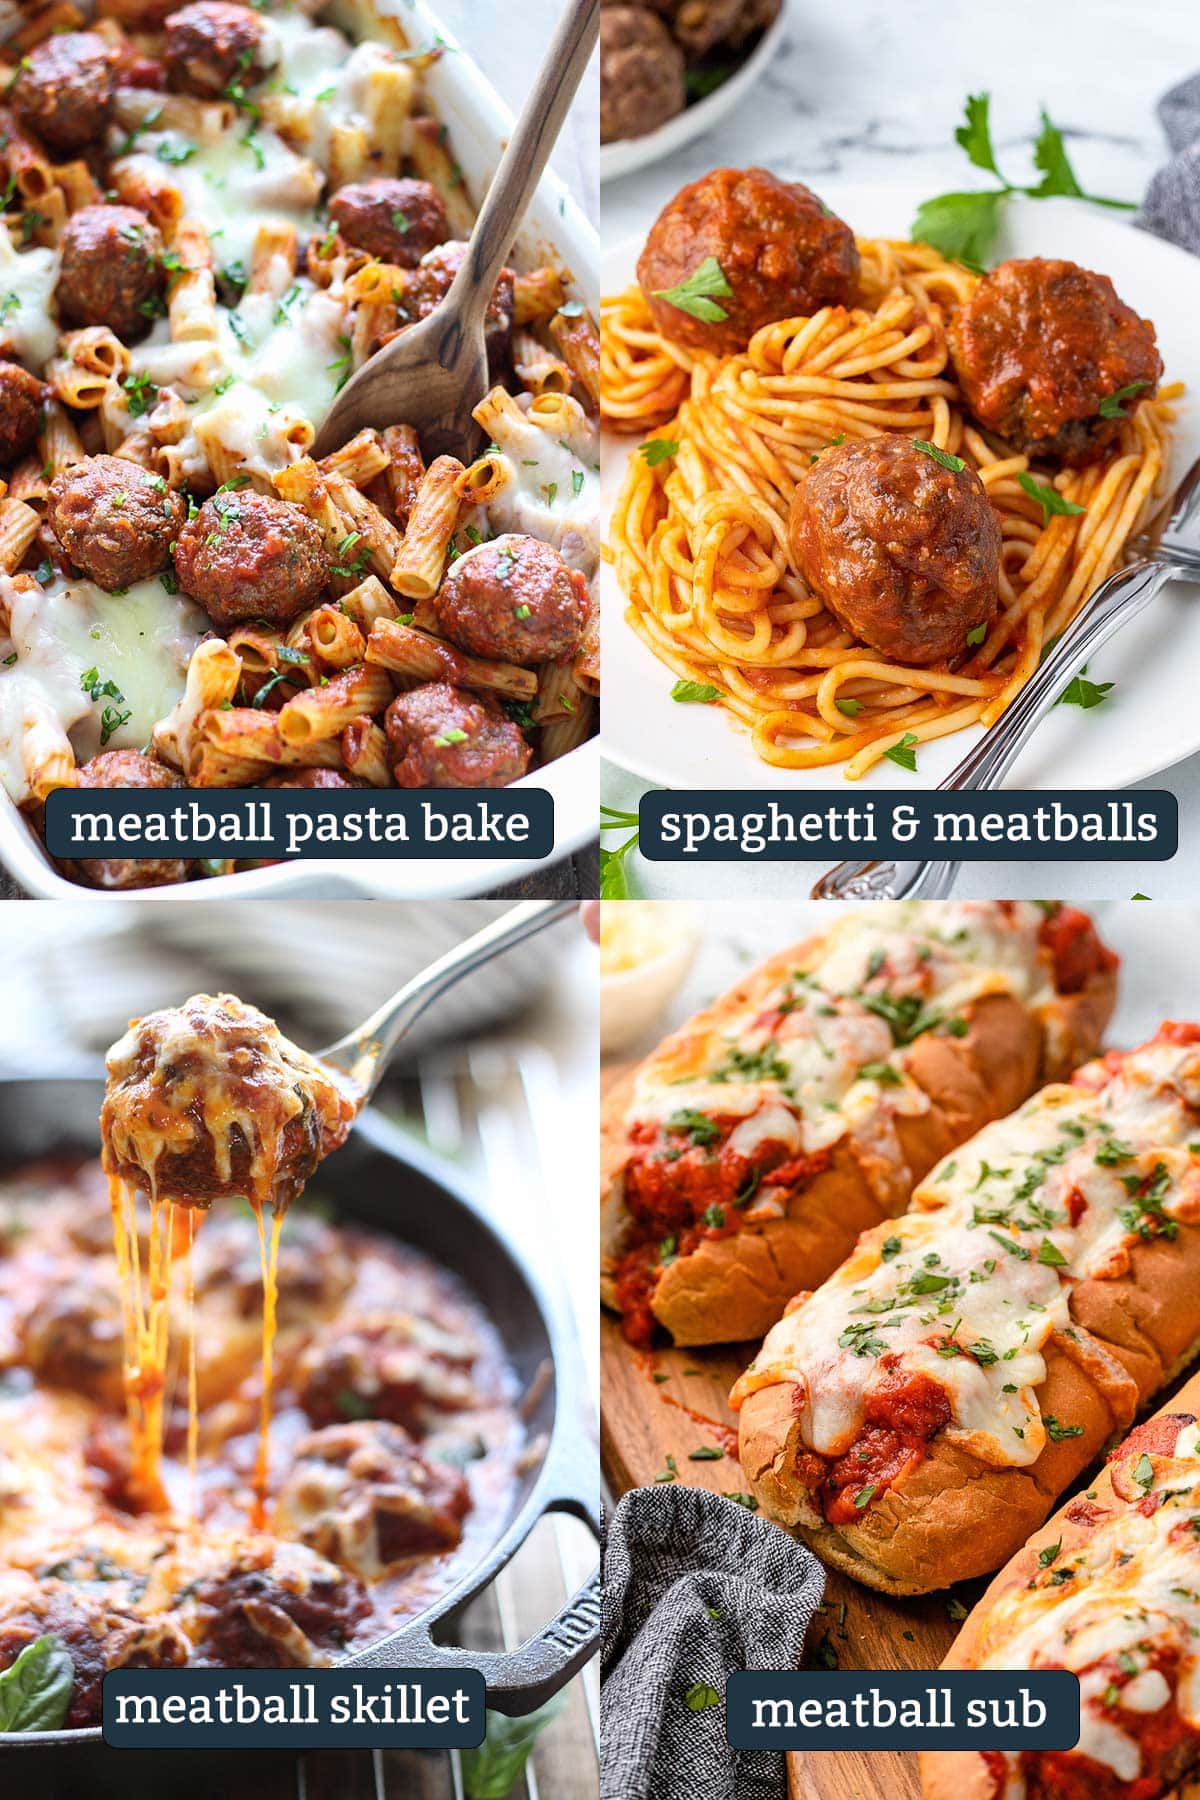 Parmesan meatballs in a meatball pasta bake, spaghetti and meatballs, meatball skillet and a meatball sub.